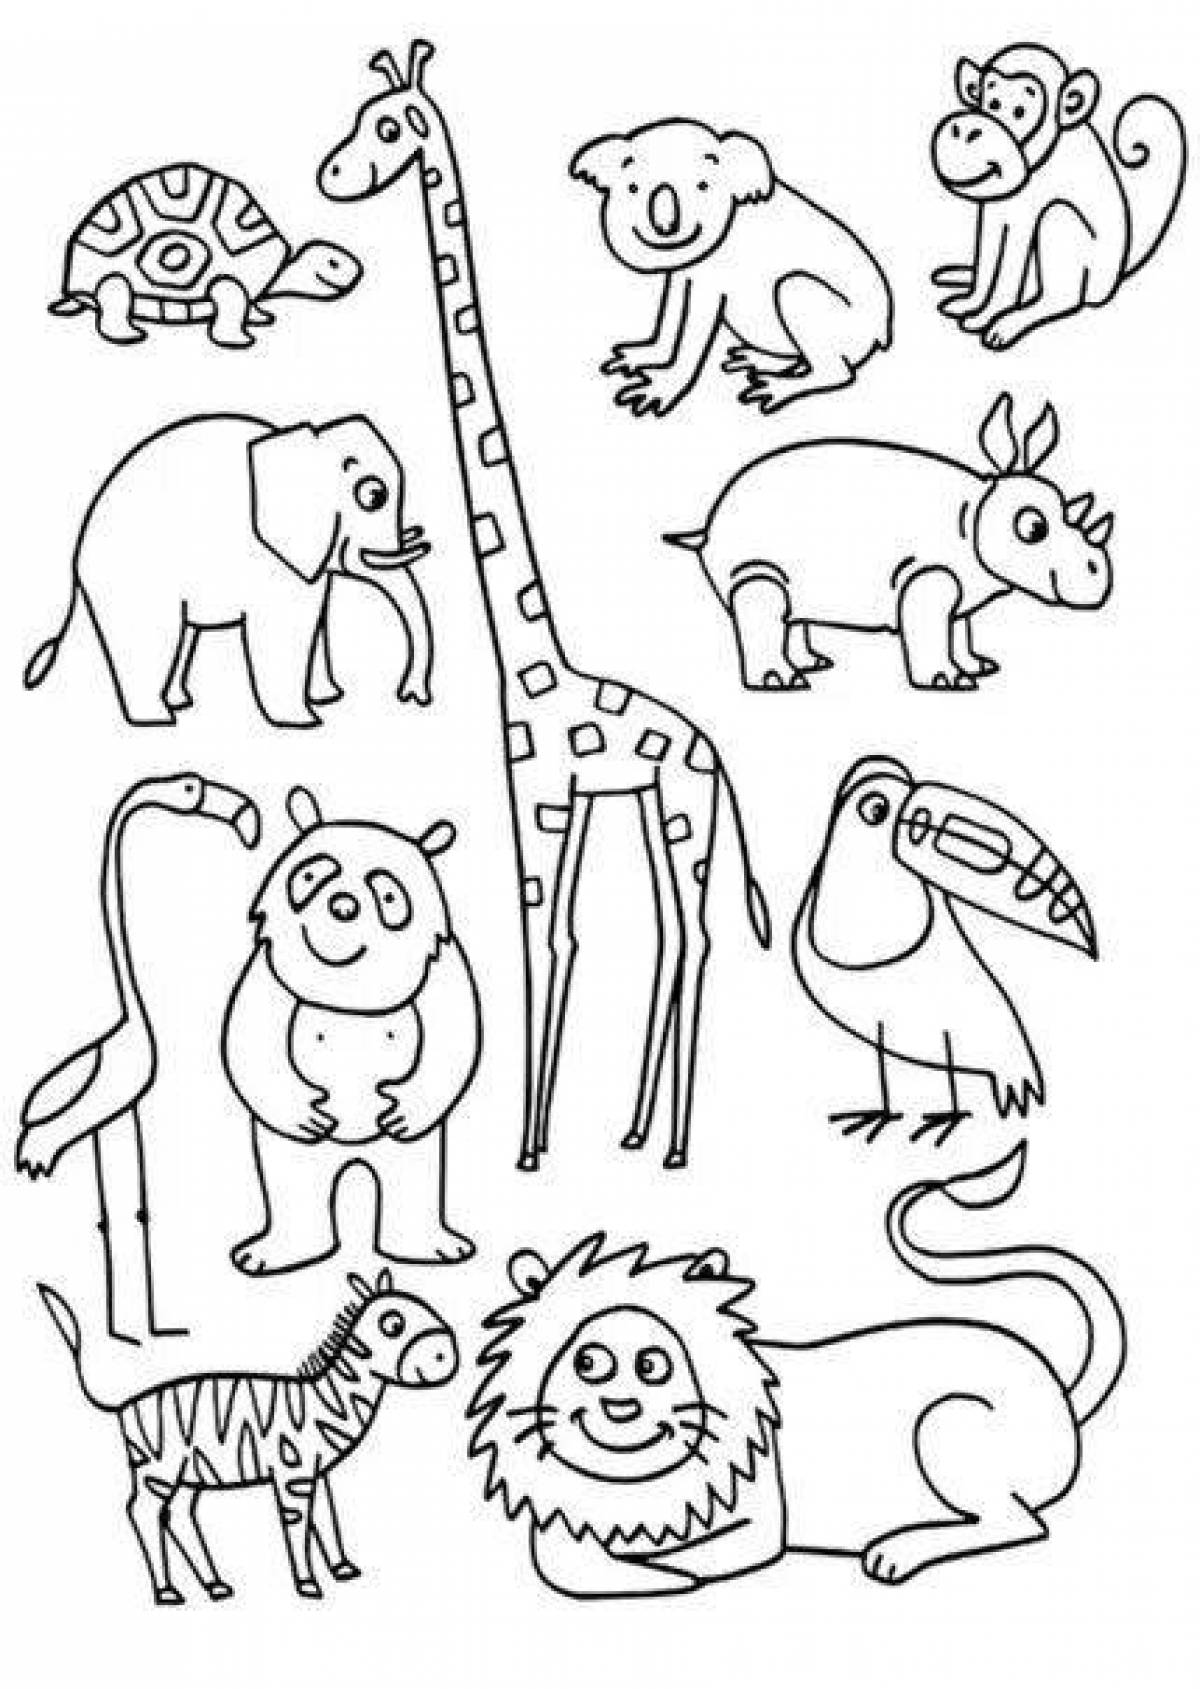 Outstanding zoo animal coloring page